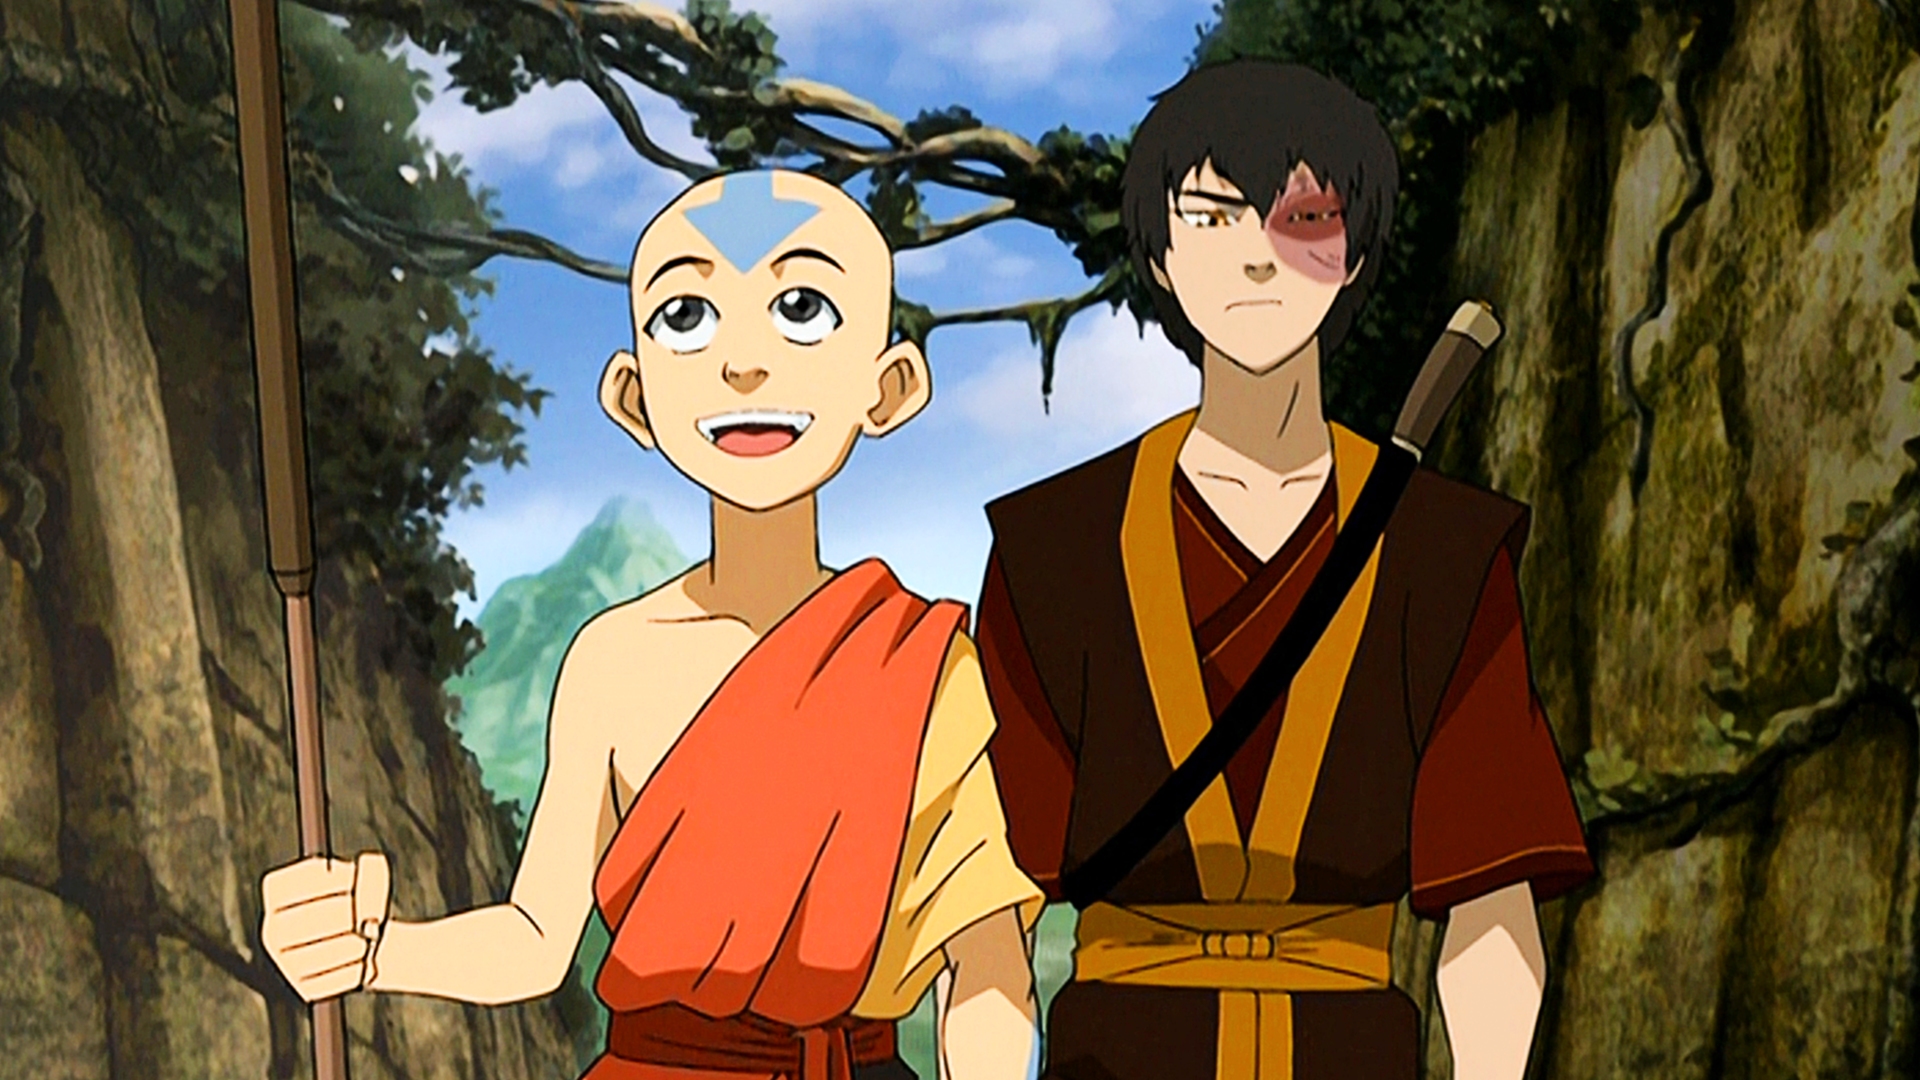 Aang Infiltrates the Fire Nation School  Scene  Avatar mynick  Aang  Infiltrates the Fire Nation School  Scene  Avatar mynick  By  Nickelodeon  Facebook